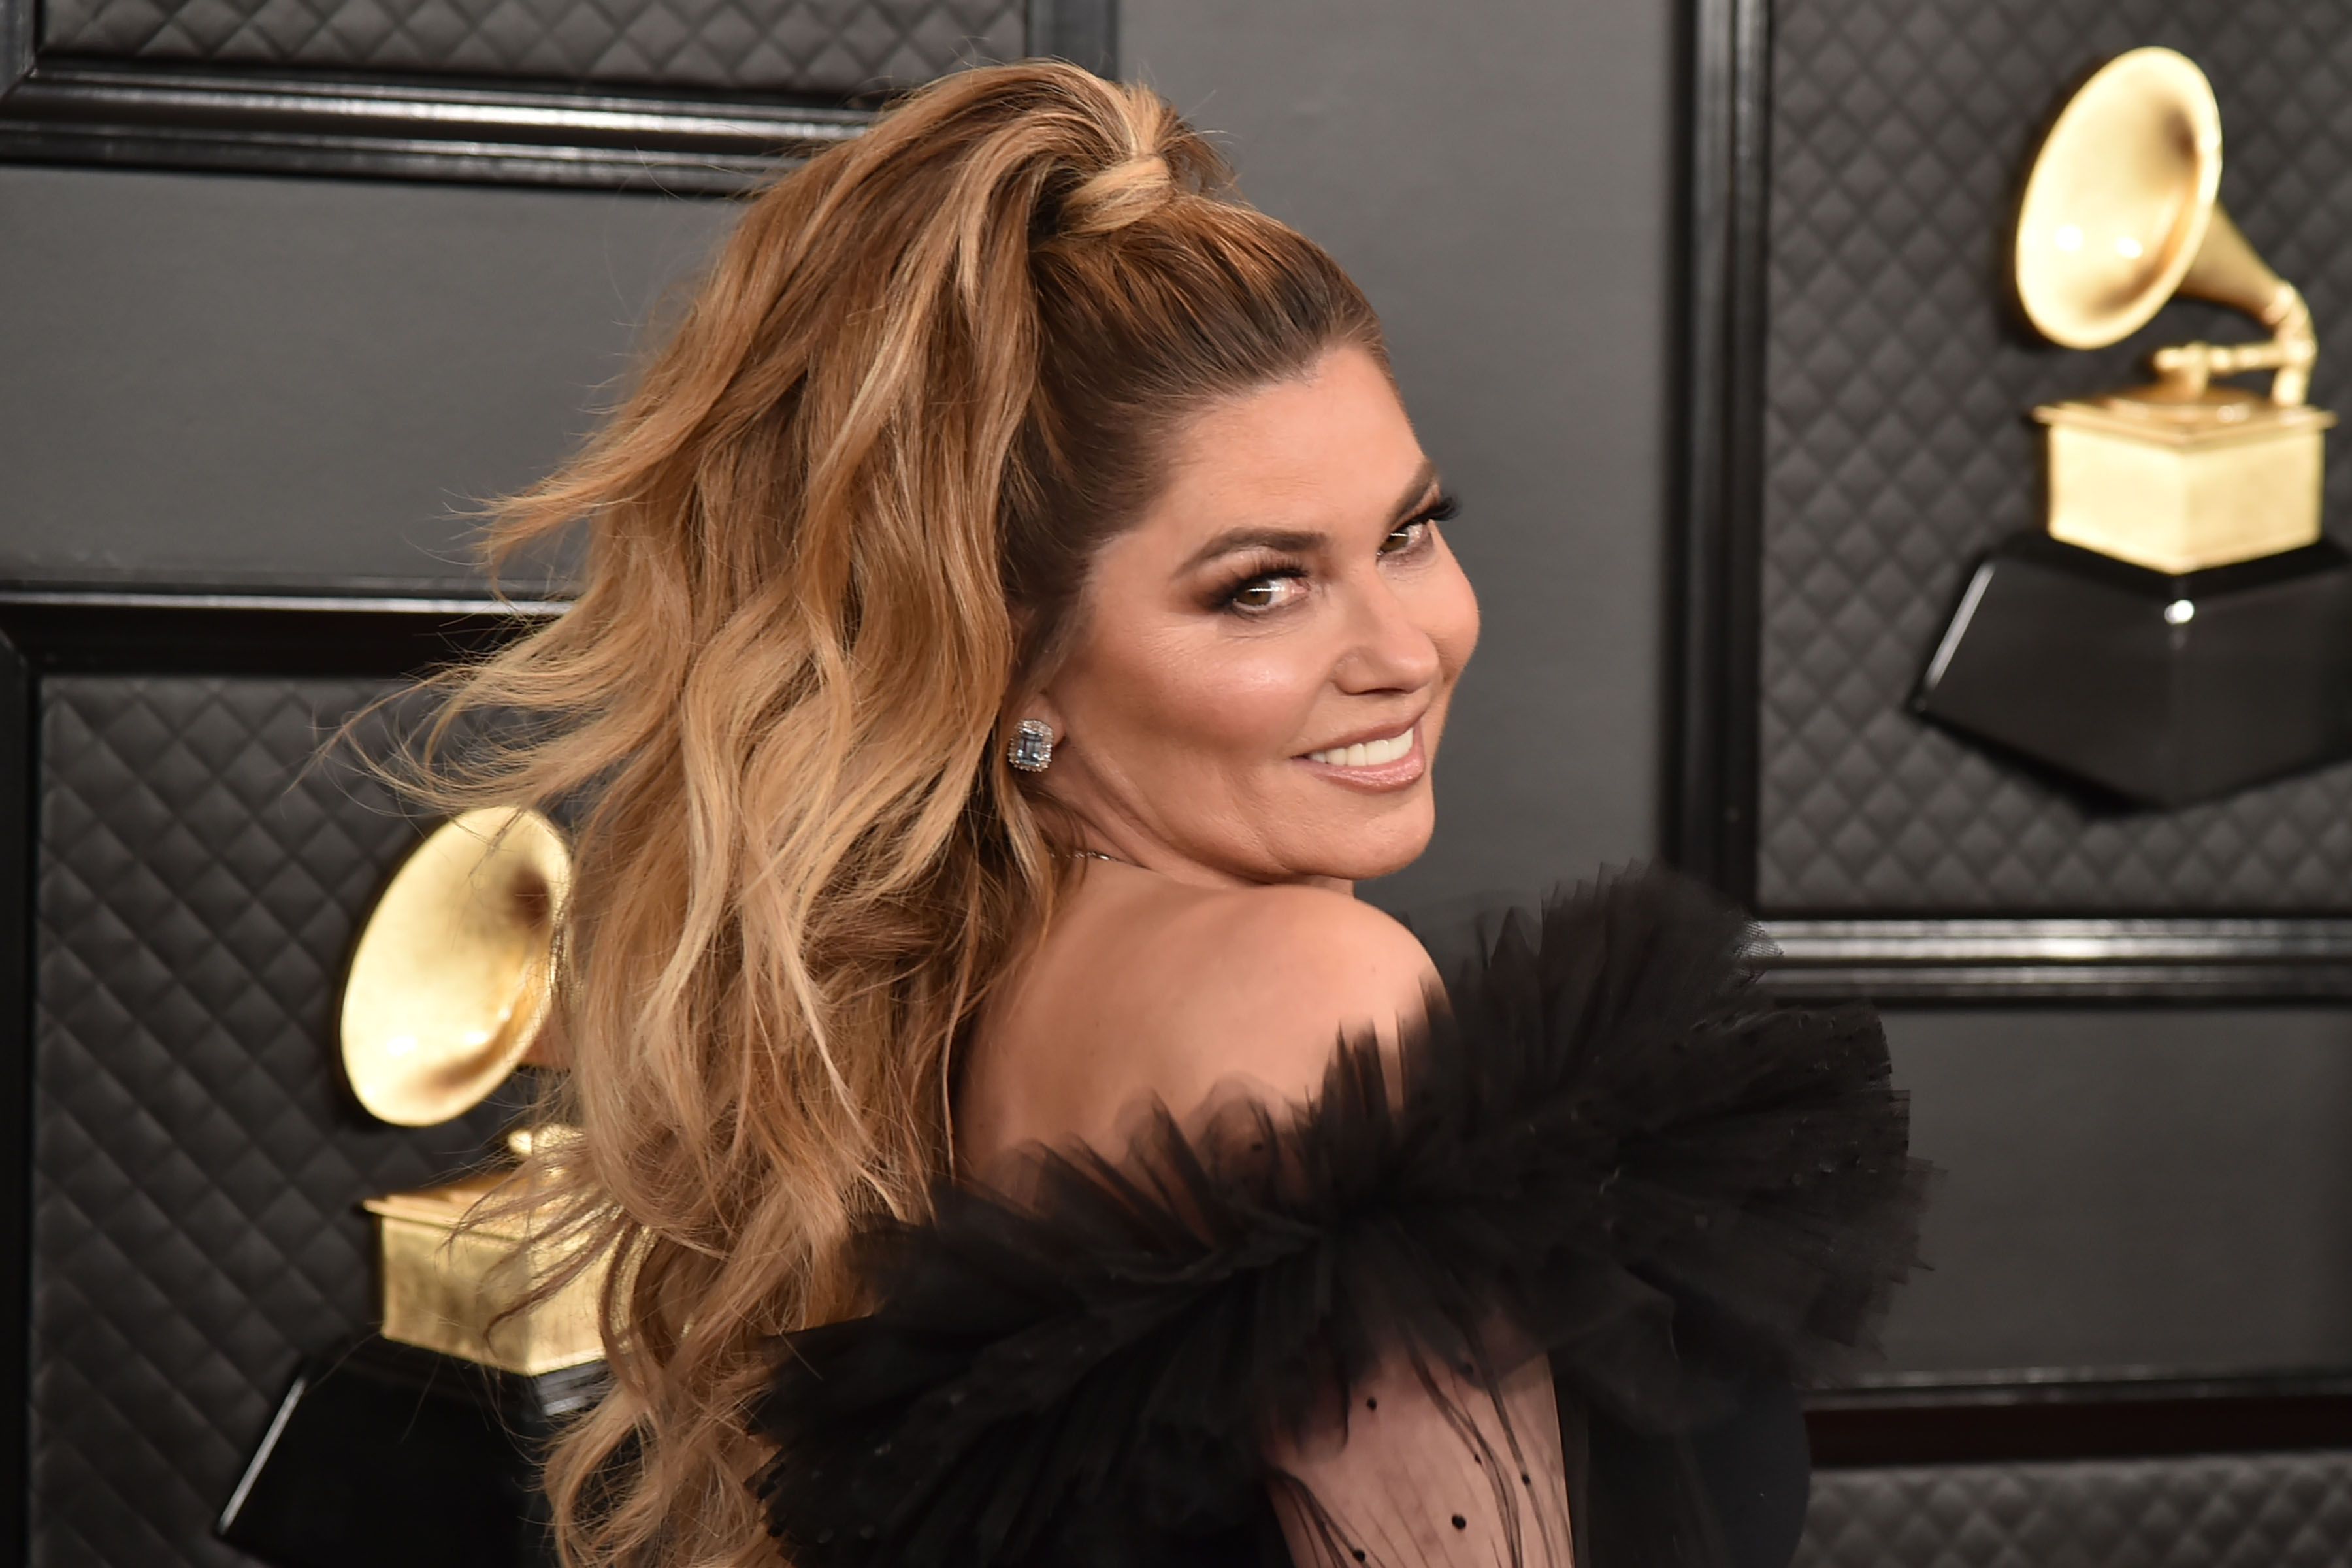 Shania Twain, 57, looks phenomenal in skin-tight hot pants during  unexpected moment on stage